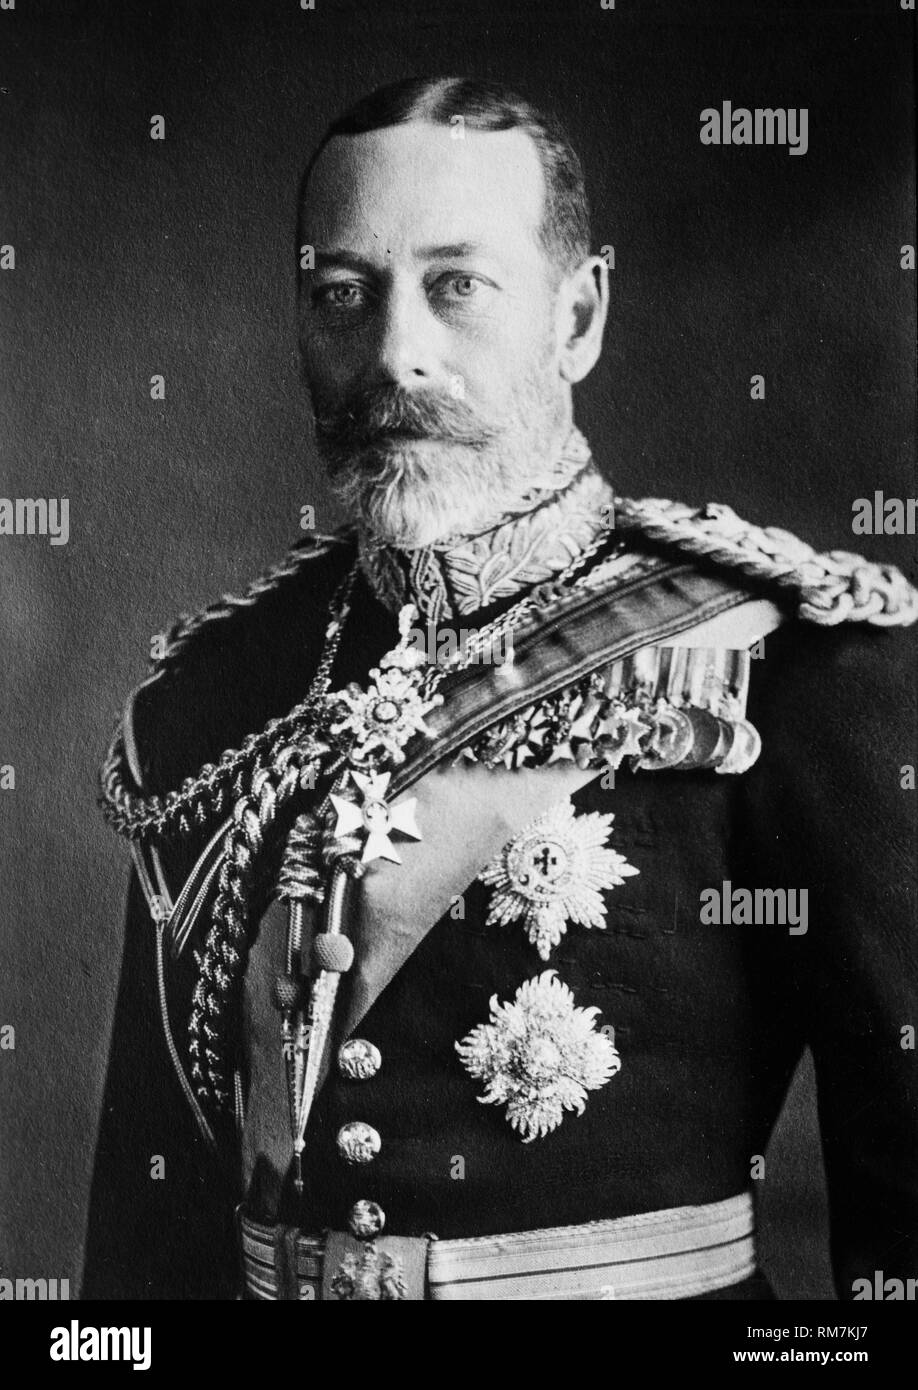 King George V of the United Kingdom, (1865-1936), reign (1910-1936), portrait photograph, 1923 Stock Photo